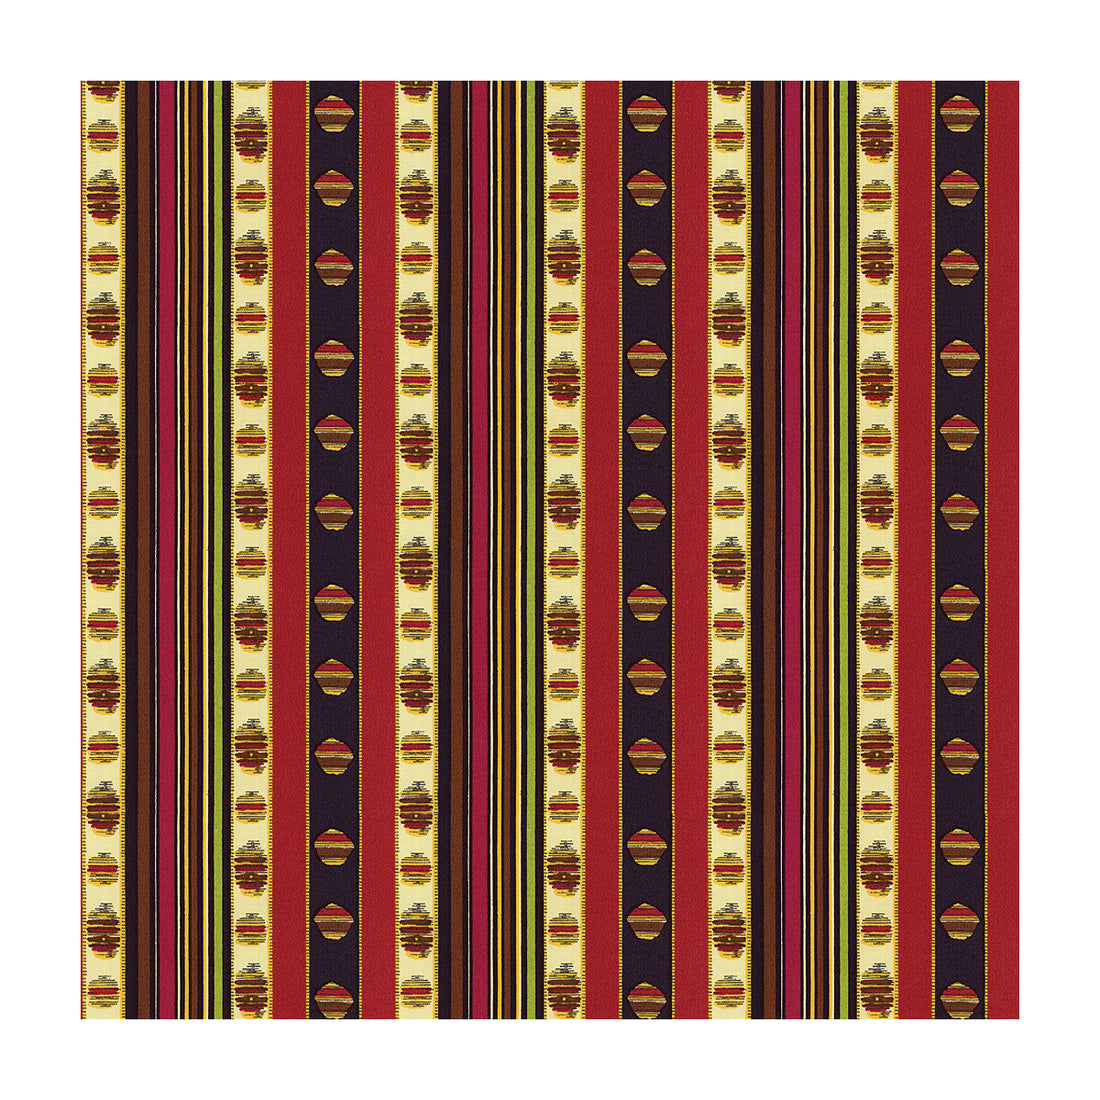 Rayure Moire fabric in rouge color - pattern 8015143.193.0 - by Brunschwig &amp; Fils in the Madeleine Castaing collection